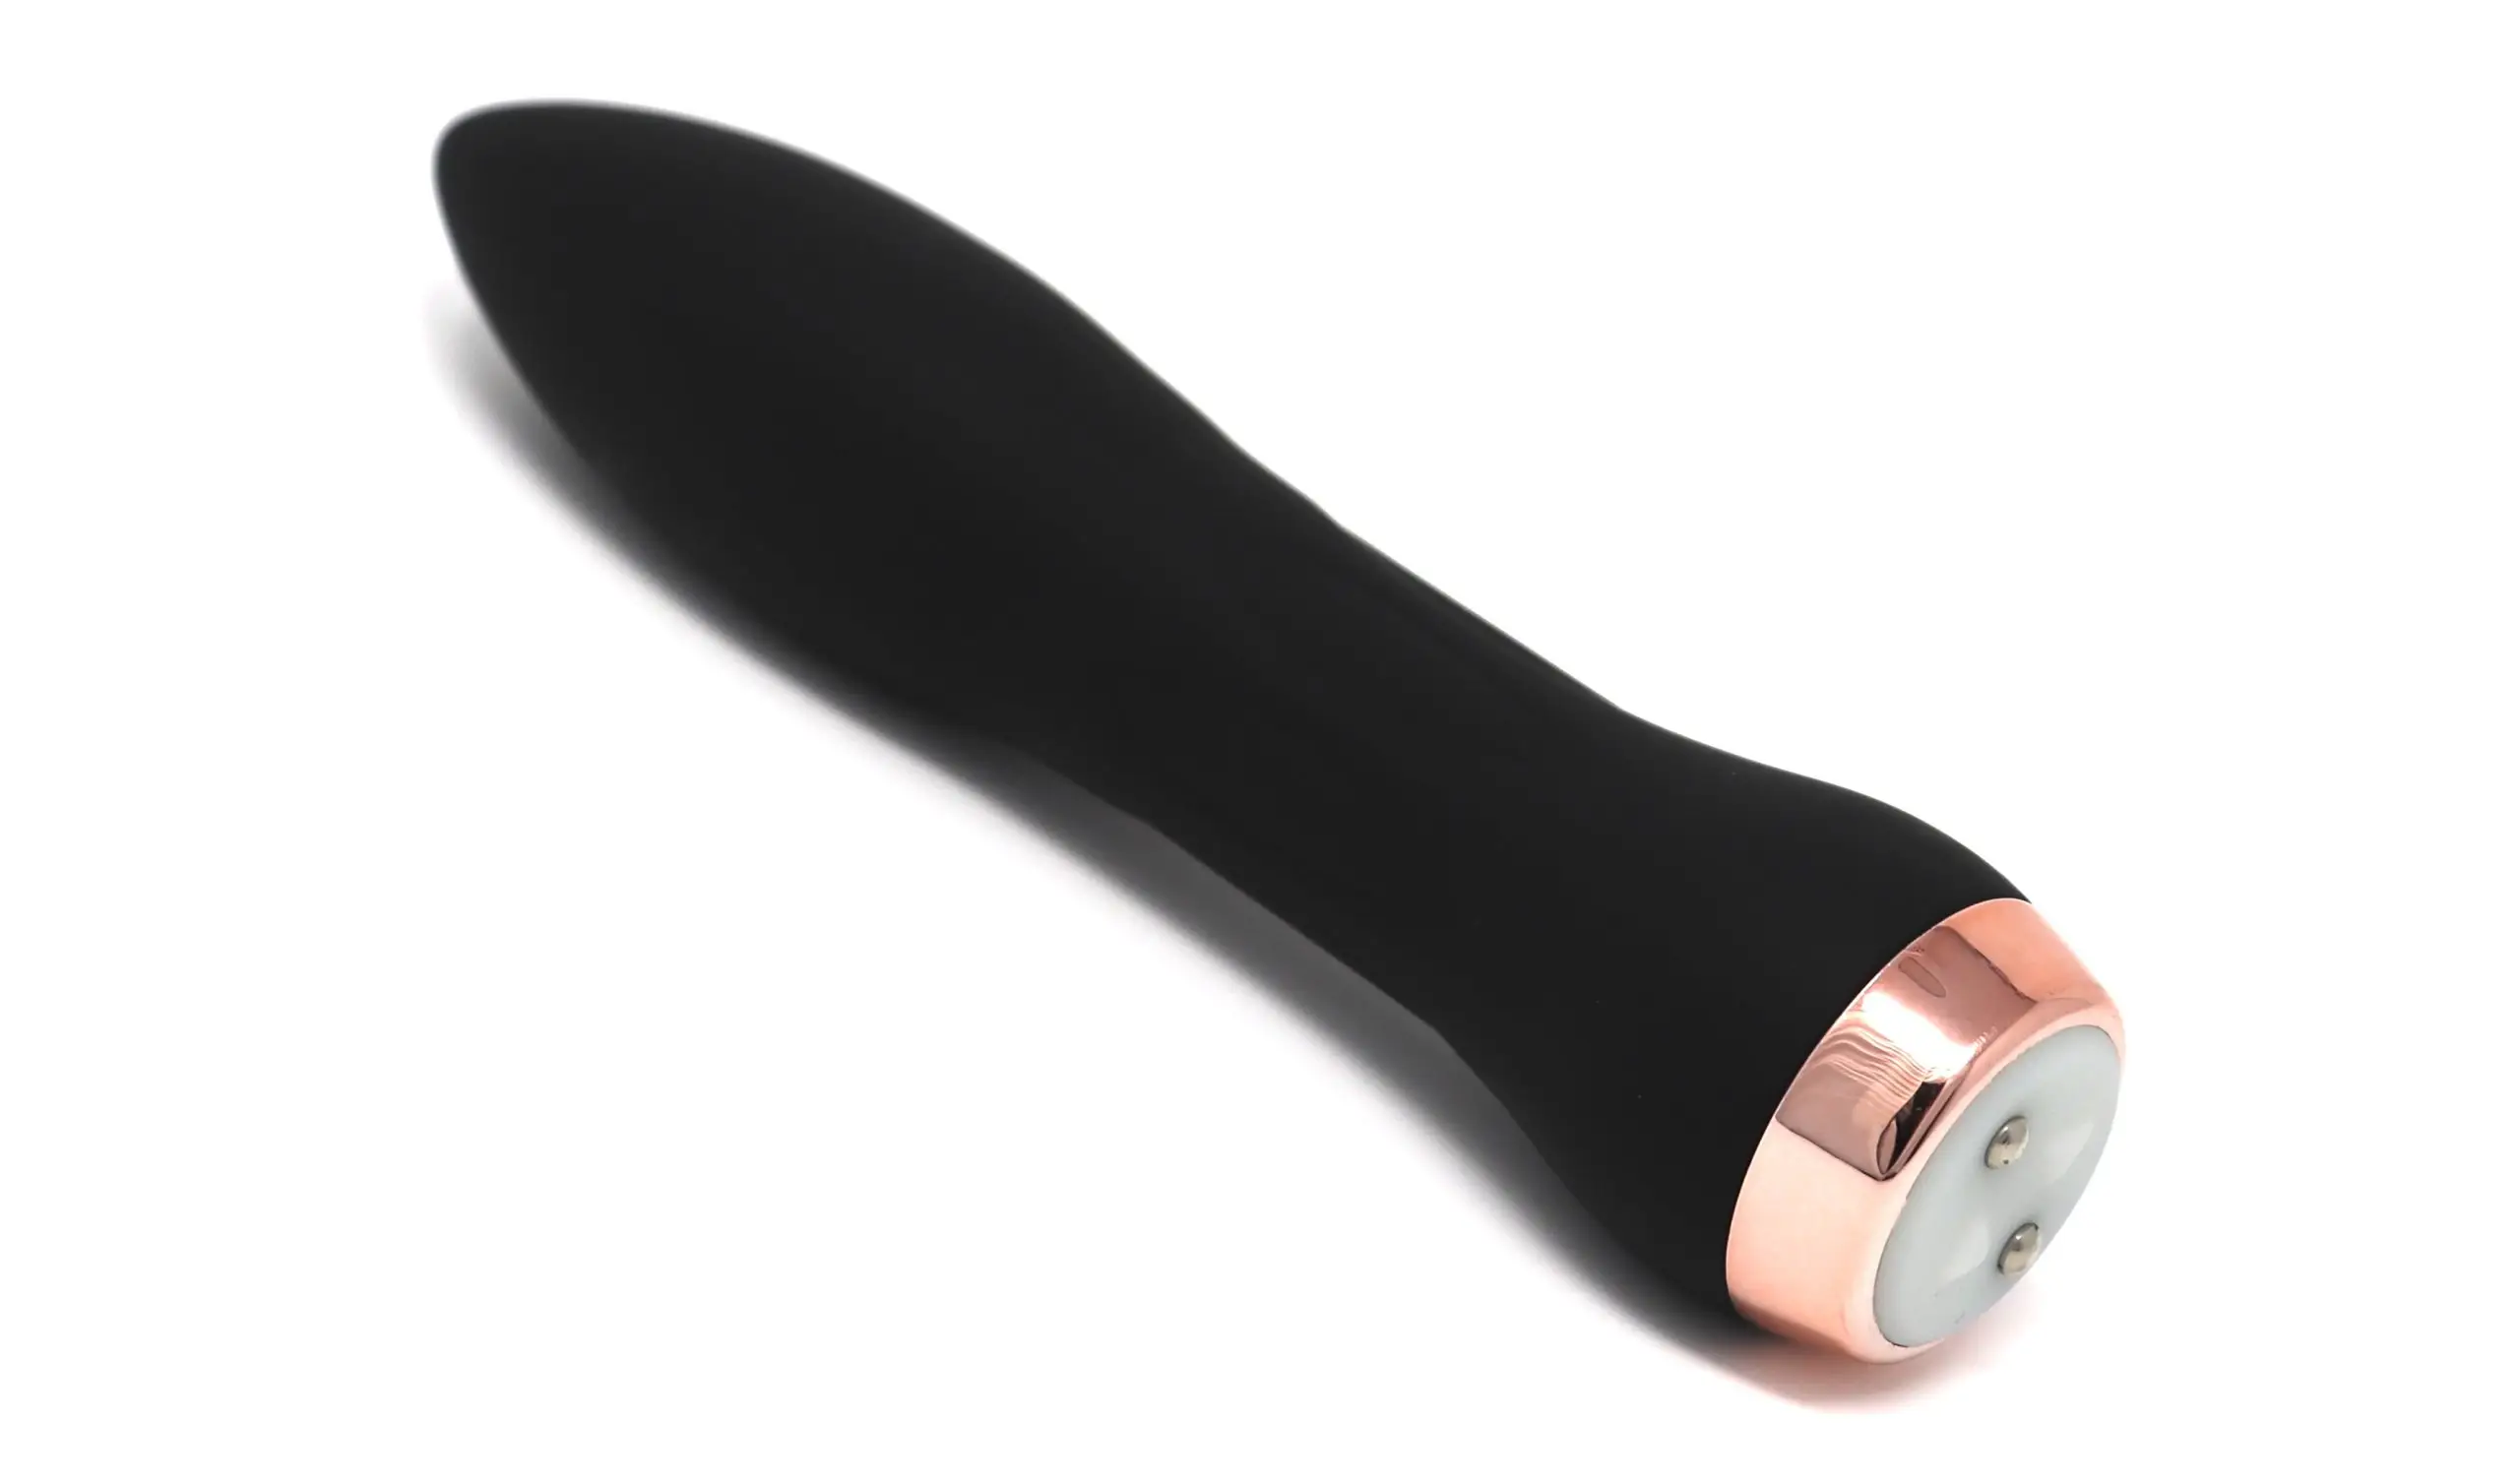 Jack and Jill Adult's Jackie Love bullet vibrator in black